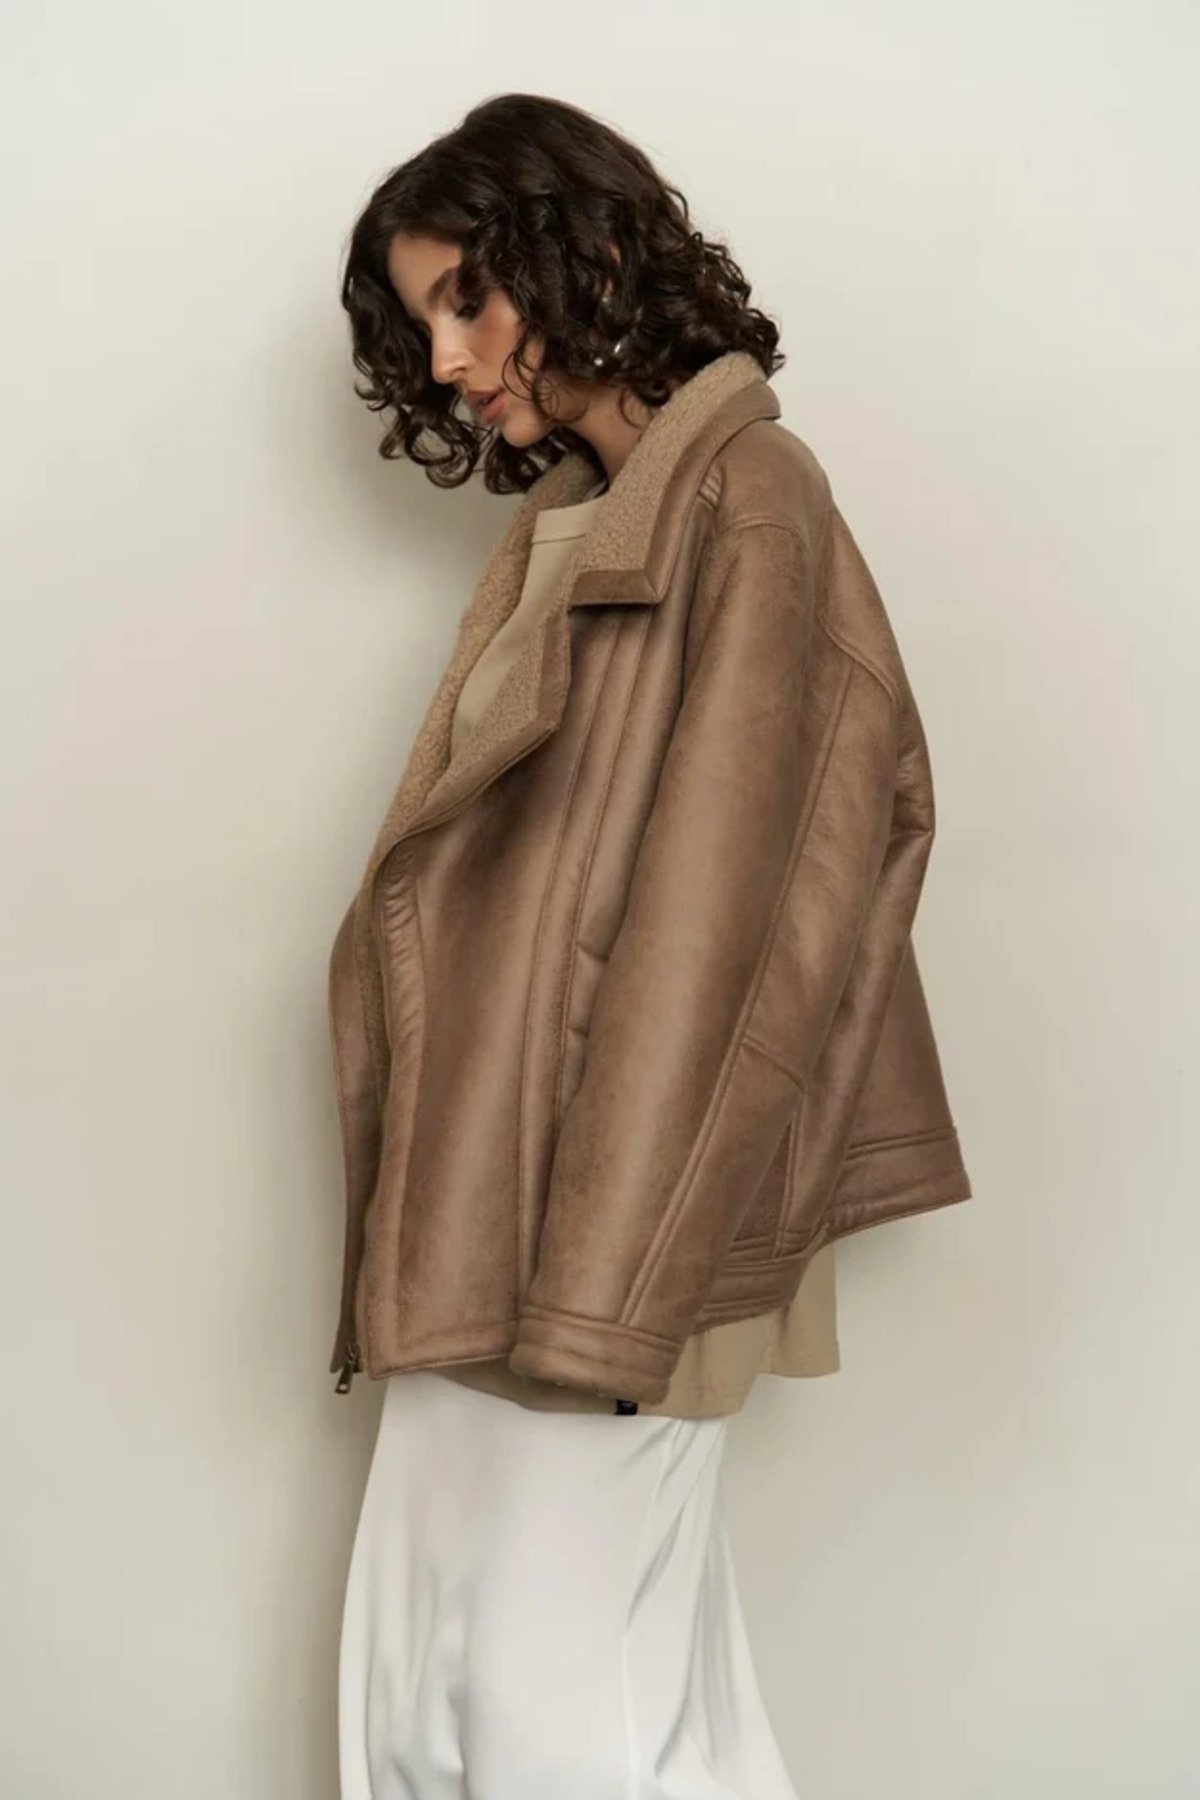 Laluvia Beige Shelby Shearling Leather Jacket